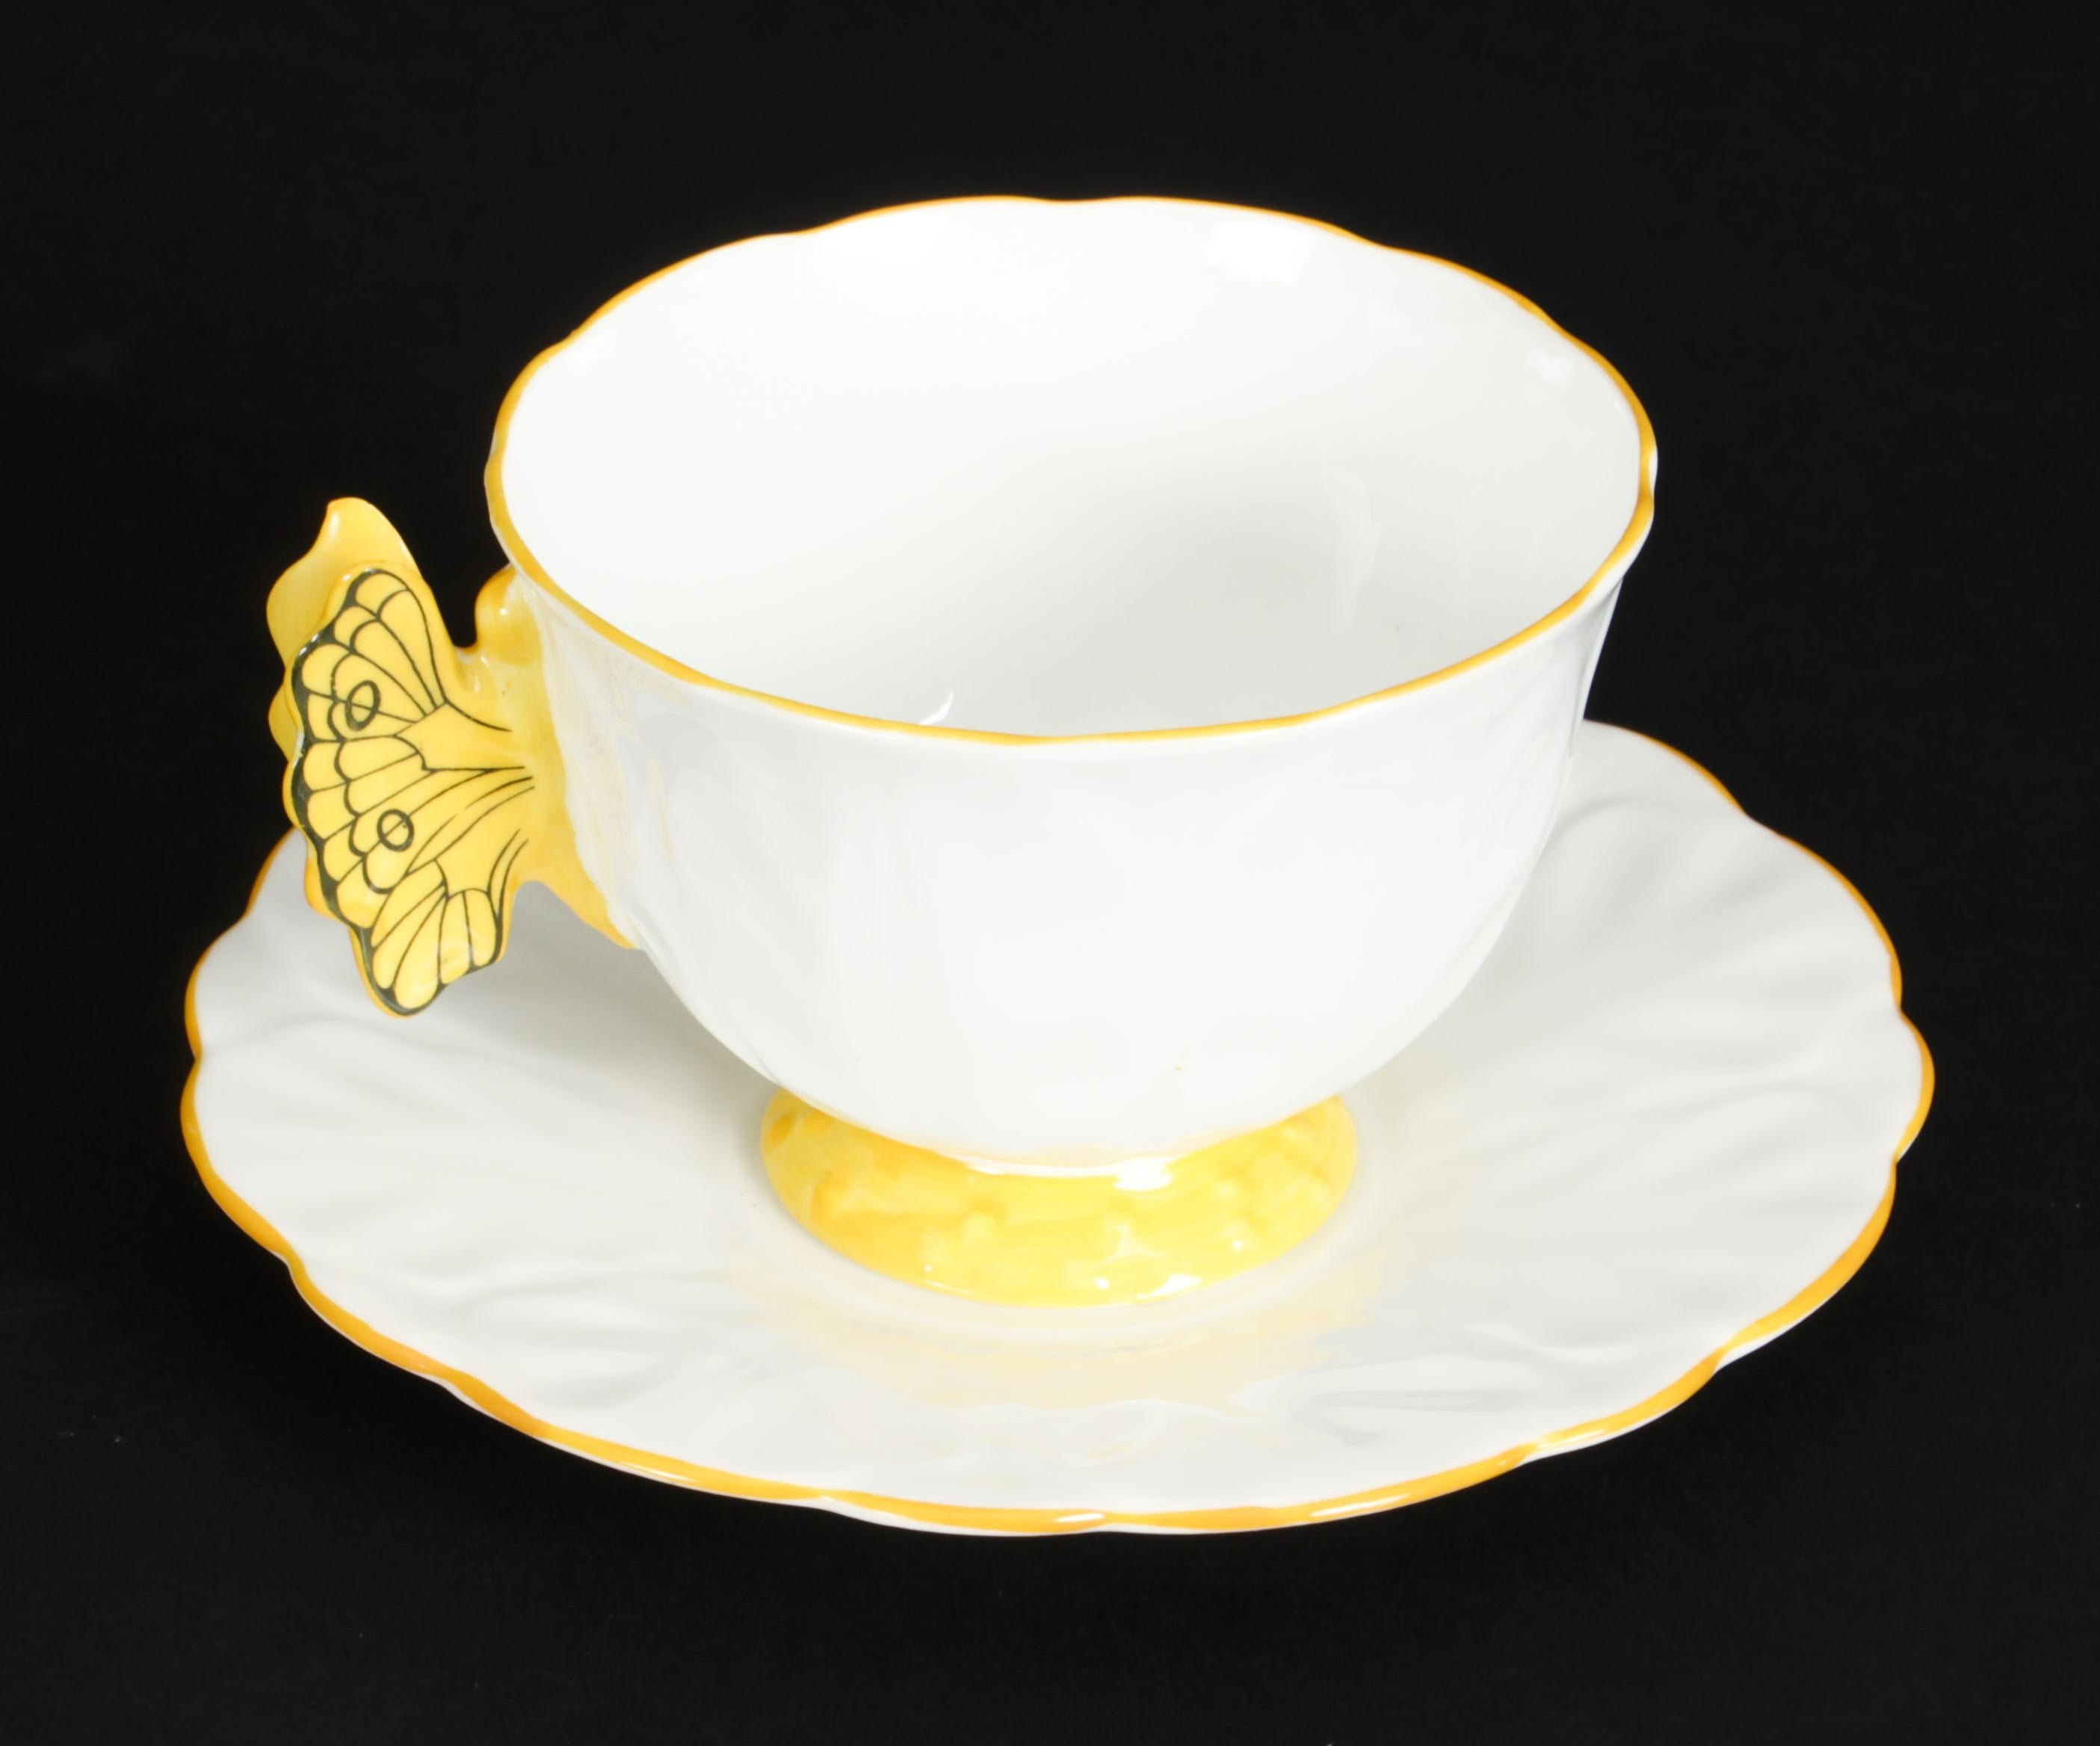 An exquisite, rare, and highly collectable 1920s Art Deco Trio tea cup, saucer and side plate with a bright sunshine yellow trim with a butterfly handle.

Aynsley China was a British producer of fine bone china, tableware and commemorative